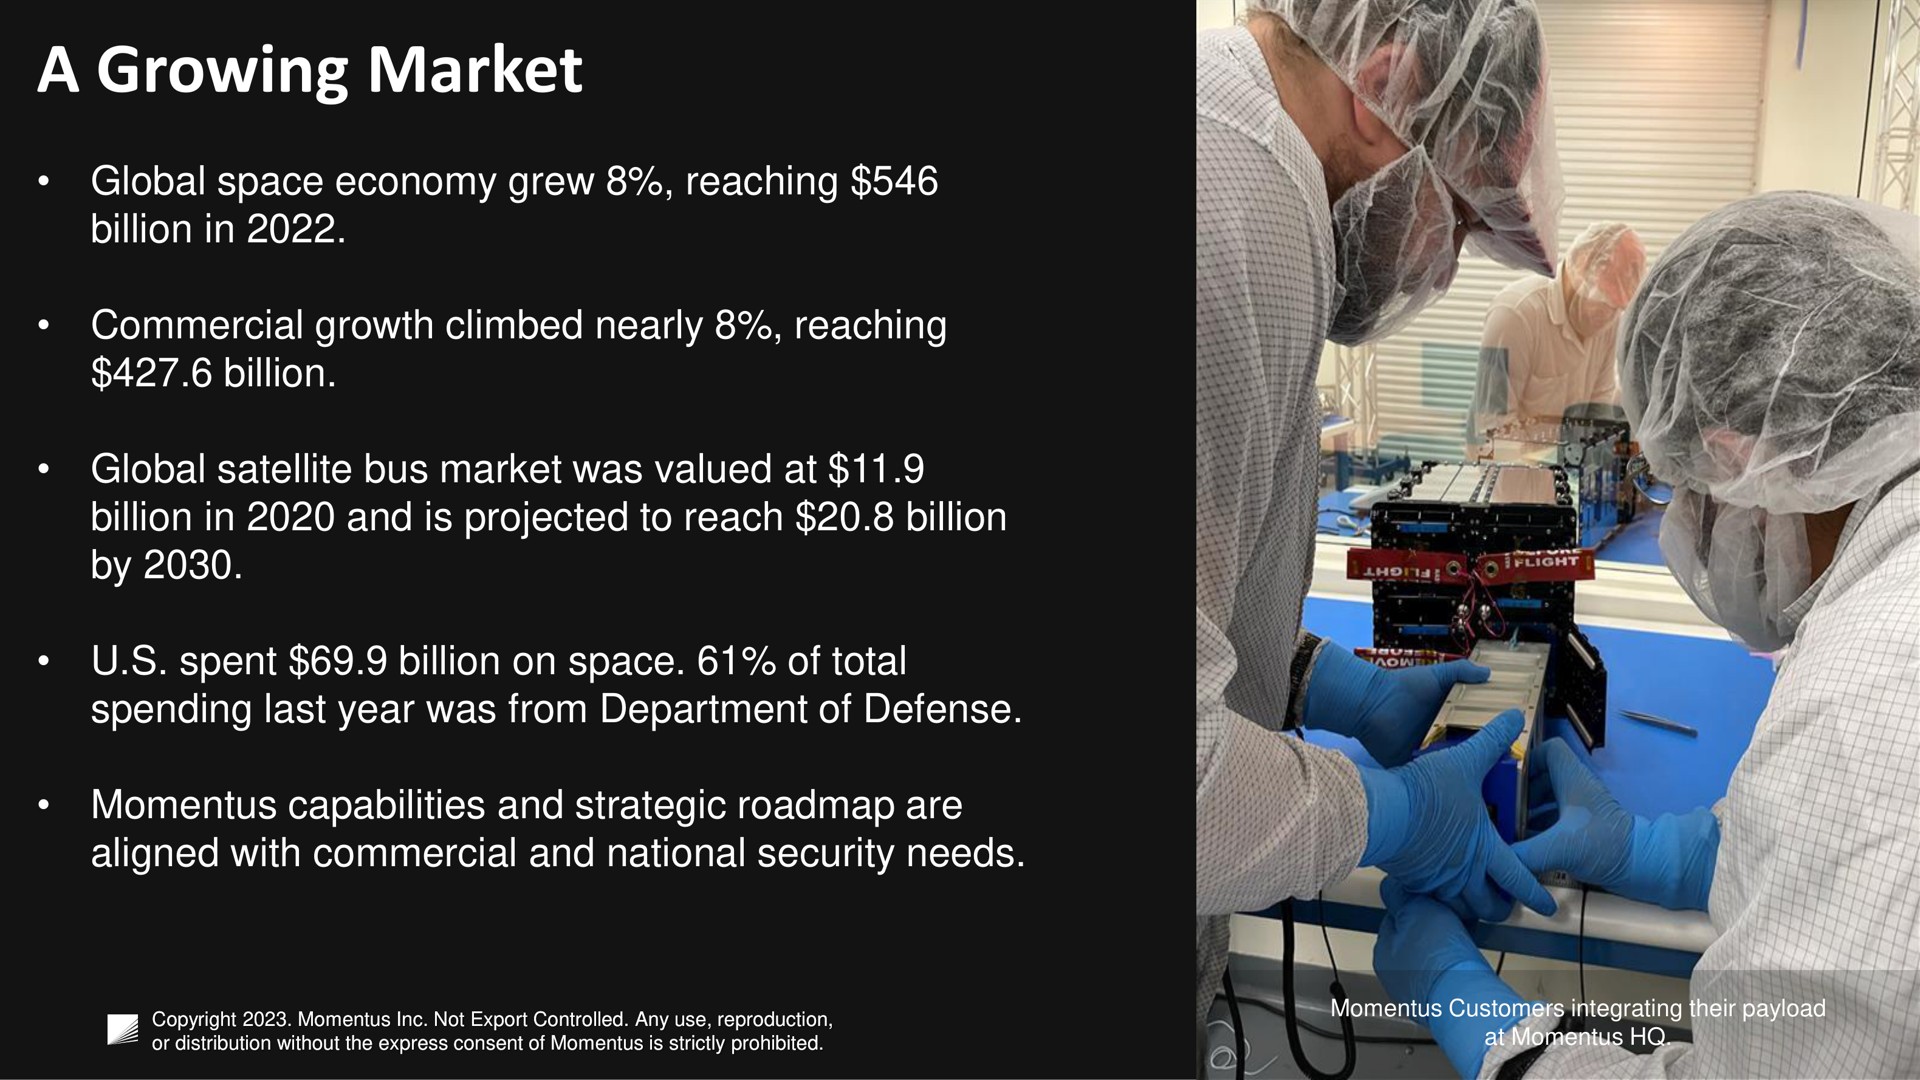 a growing market global space economy grew reaching billion in commercial growth climbed nearly reaching billion global satellite bus market was valued at billion in and is projected to reach billion by spent billion on space of total spending last year was from department of defense capabilities and strategic are aligned with commercial and national security needs | Momentus